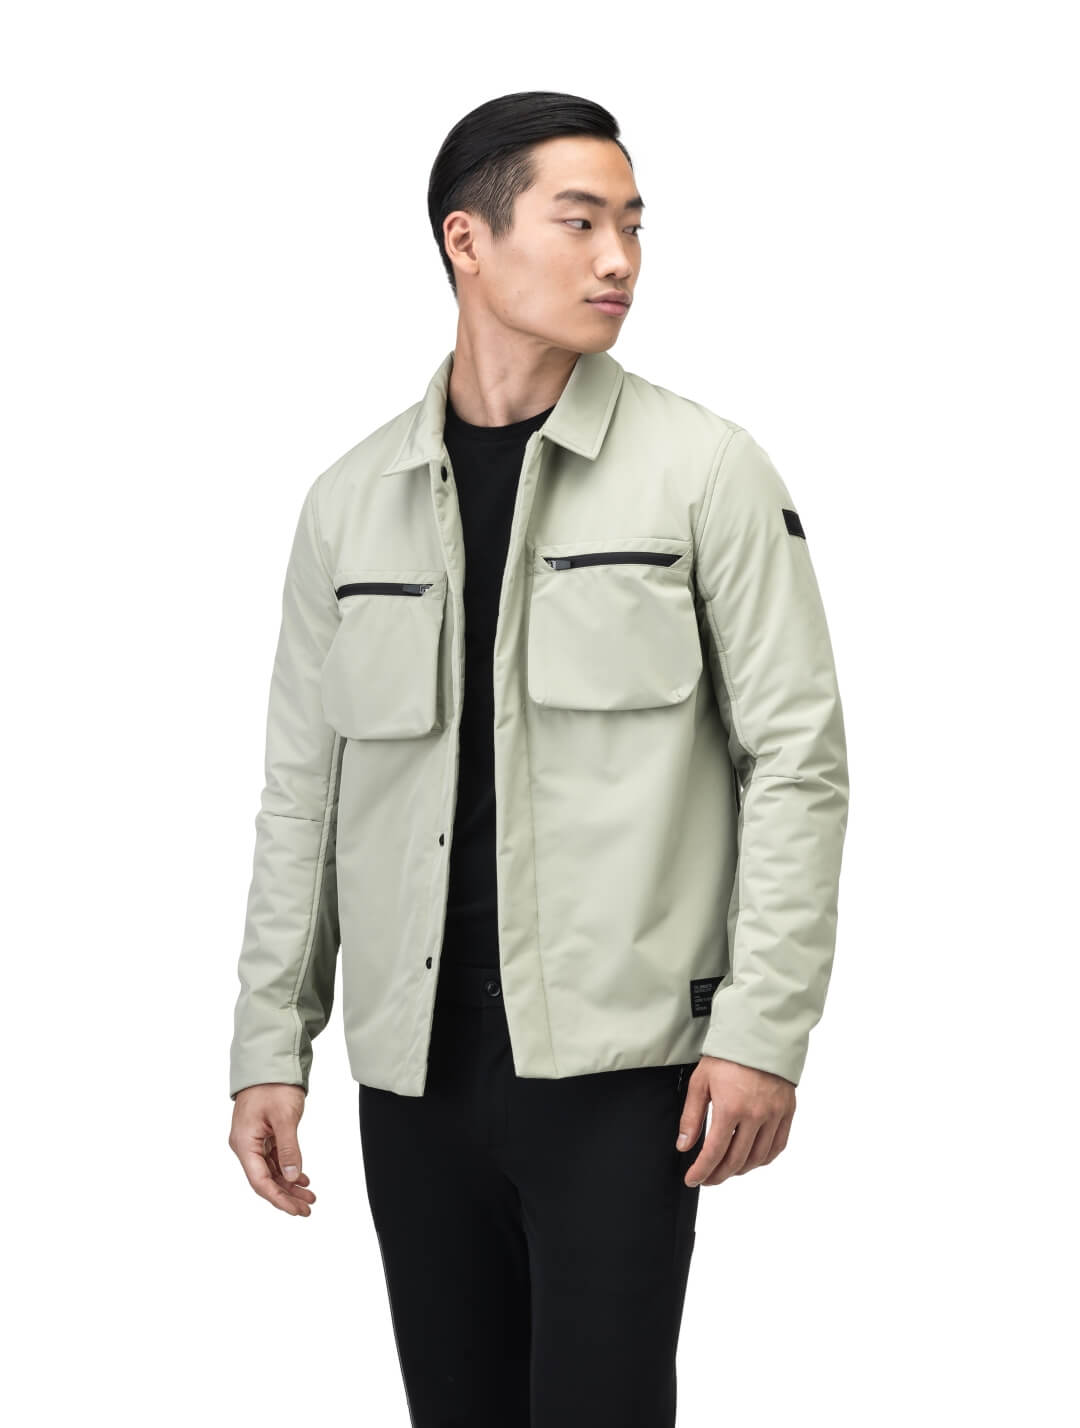 Ander Men's Mid Layer Shirt in hip length, PrimaLoft Gold Insulation Active+, 3-Ply Micro Denier front and 4-Way Durable Stretch Weave back, zipper chest pockets, snap button wind flap, and snap button cuffs, in Tea/Clover